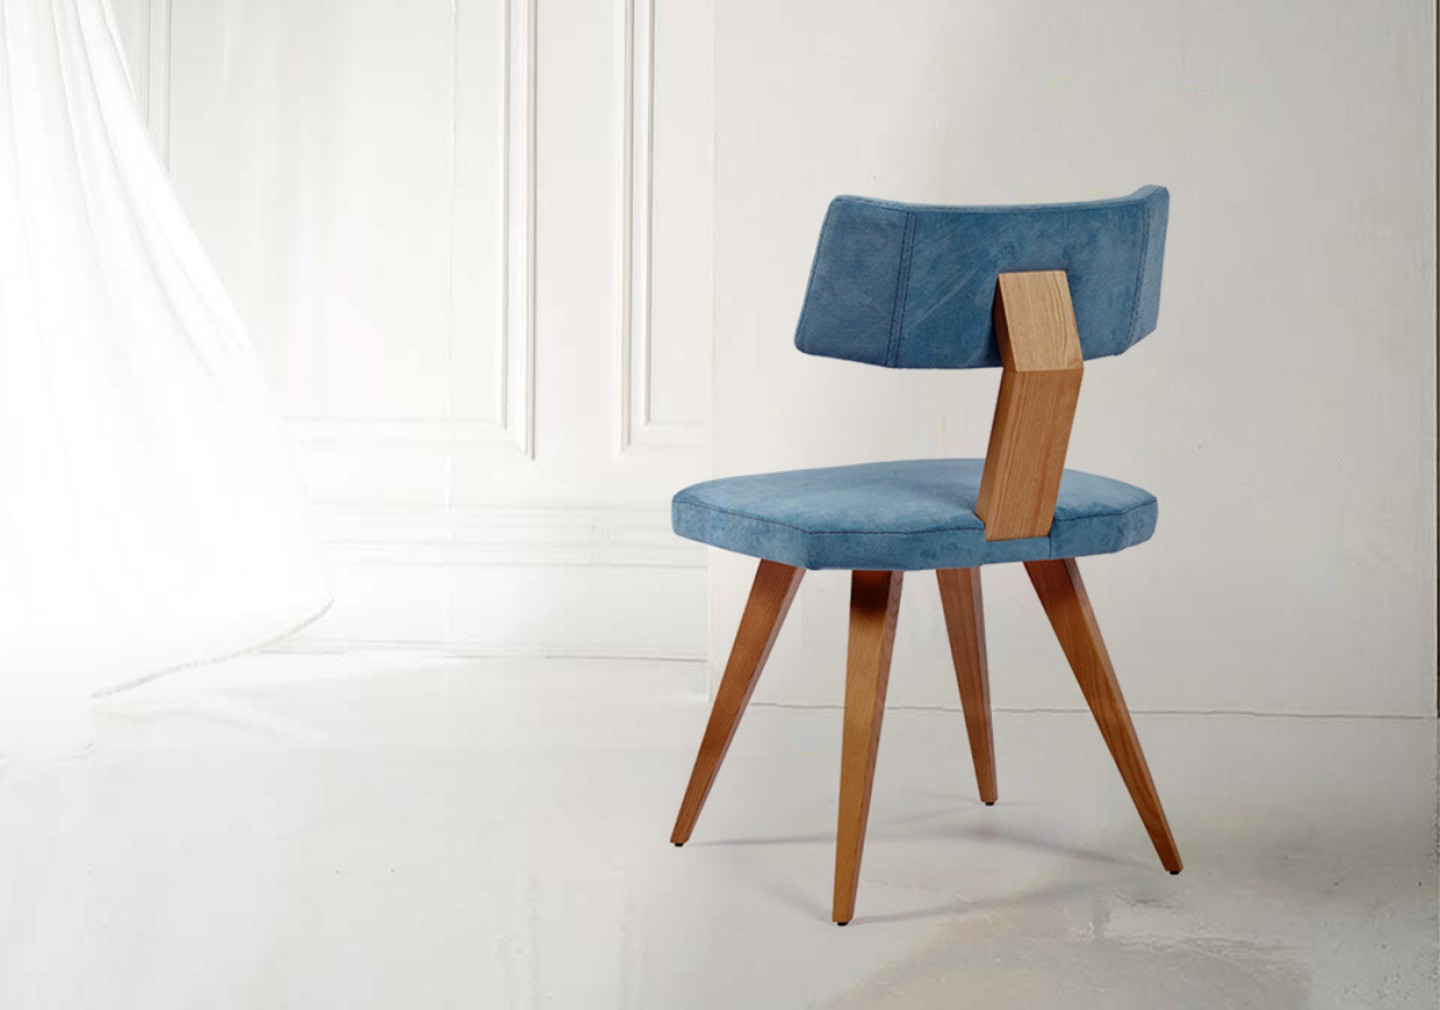 THE MILAN DINING CHAIR